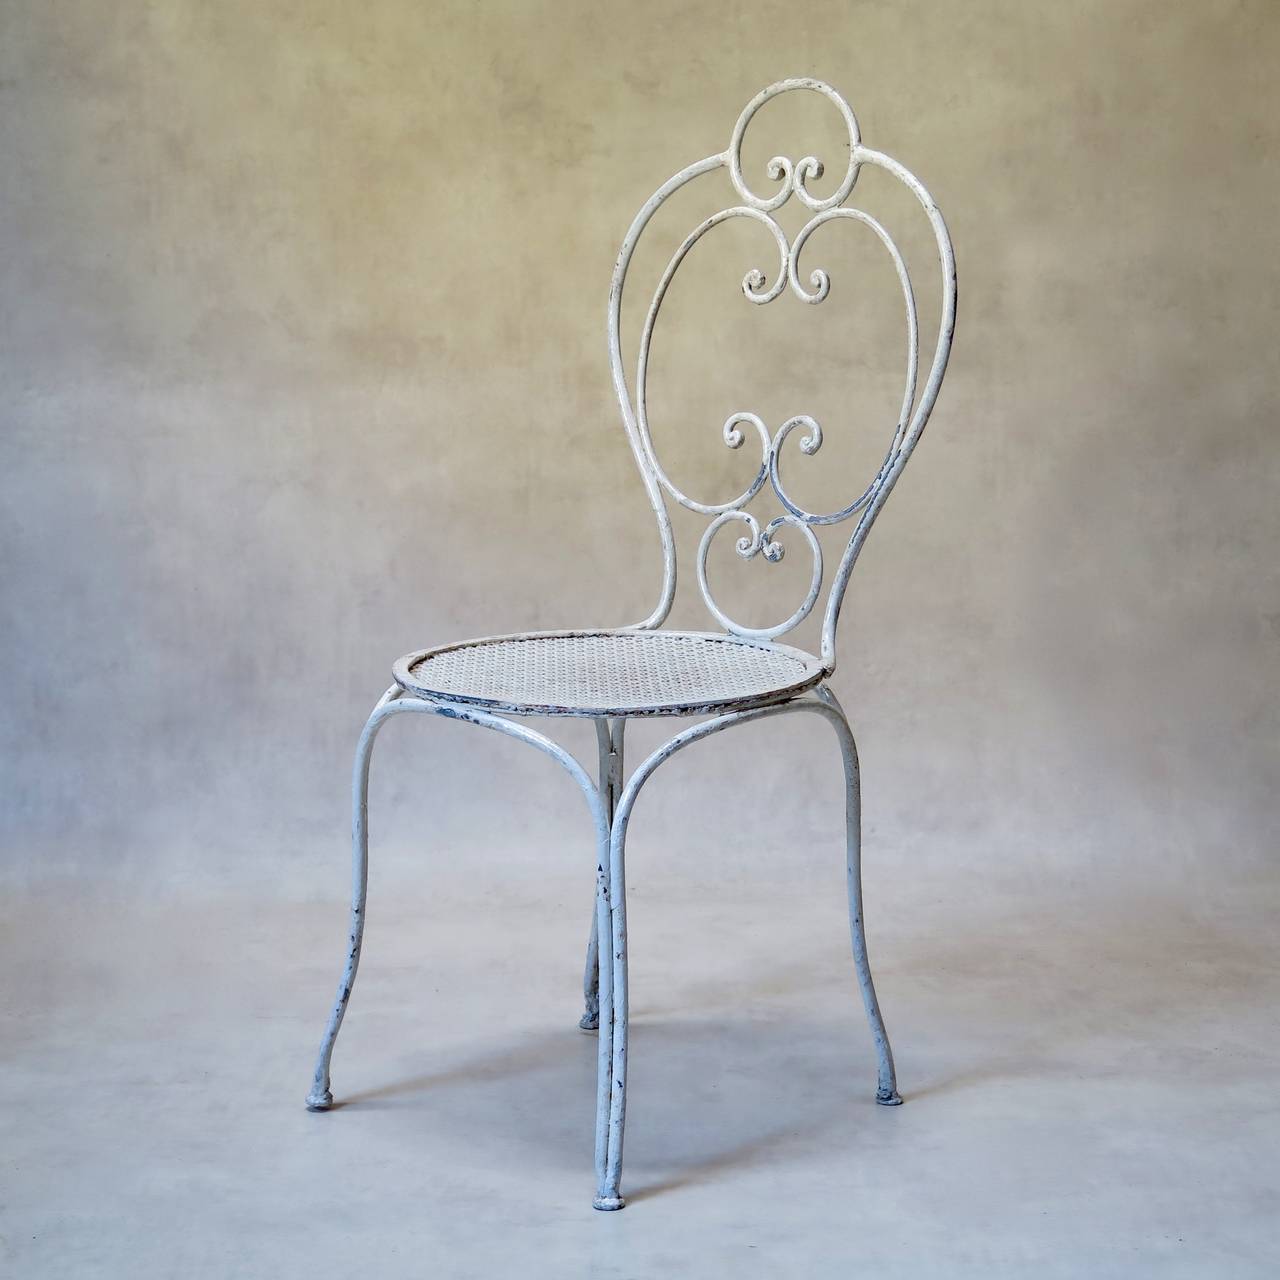 French Wrought Iron Garden Table and Four Chairs, France, 1920s